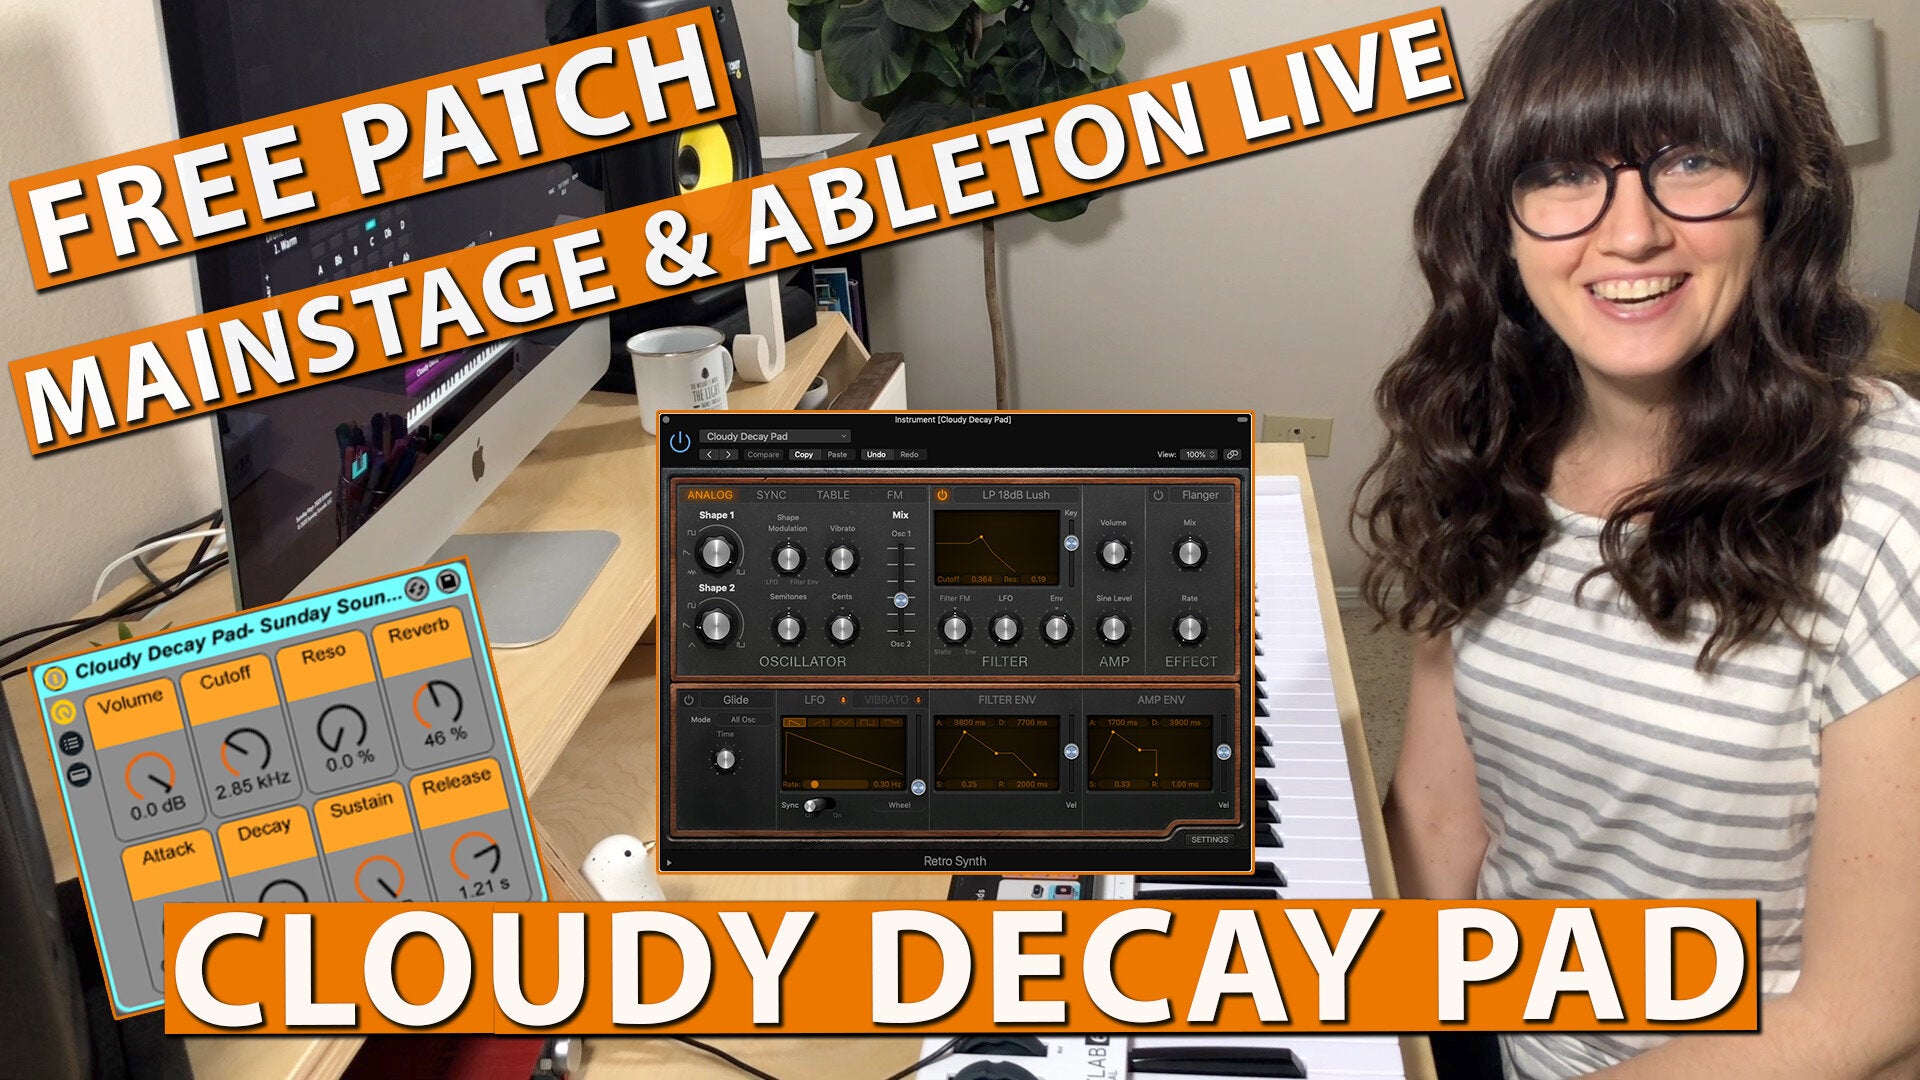 Free MainStage & Ableton Worship Patch! - Cloudy Decay Pad